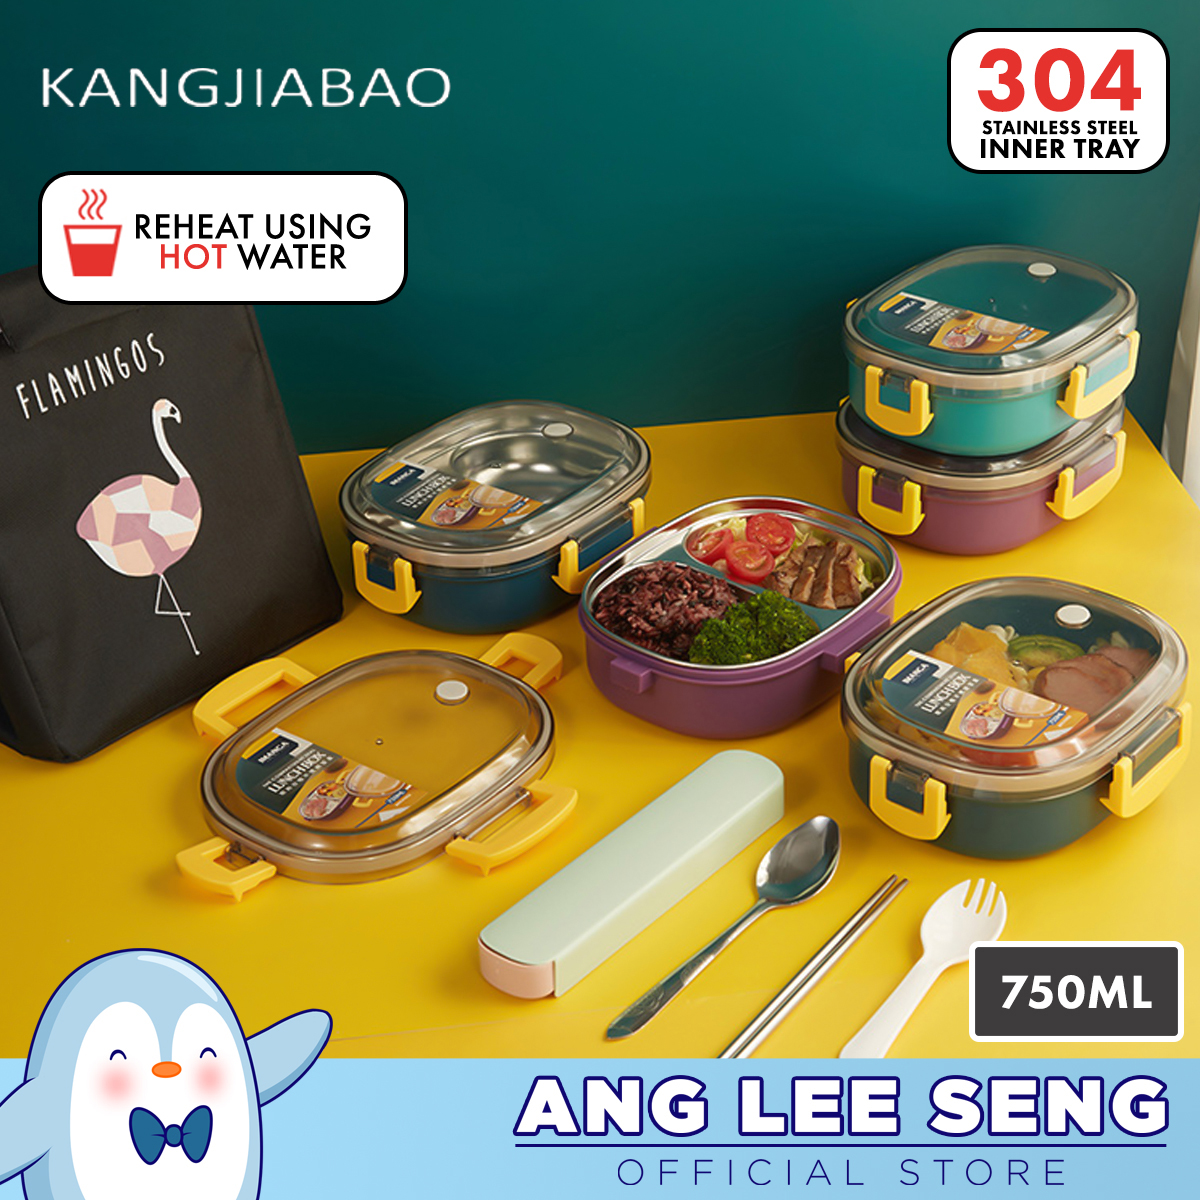 KangjiaBao 2-Compartment Bento Lunch Box with Stainless Steel Inner Tray 750ml